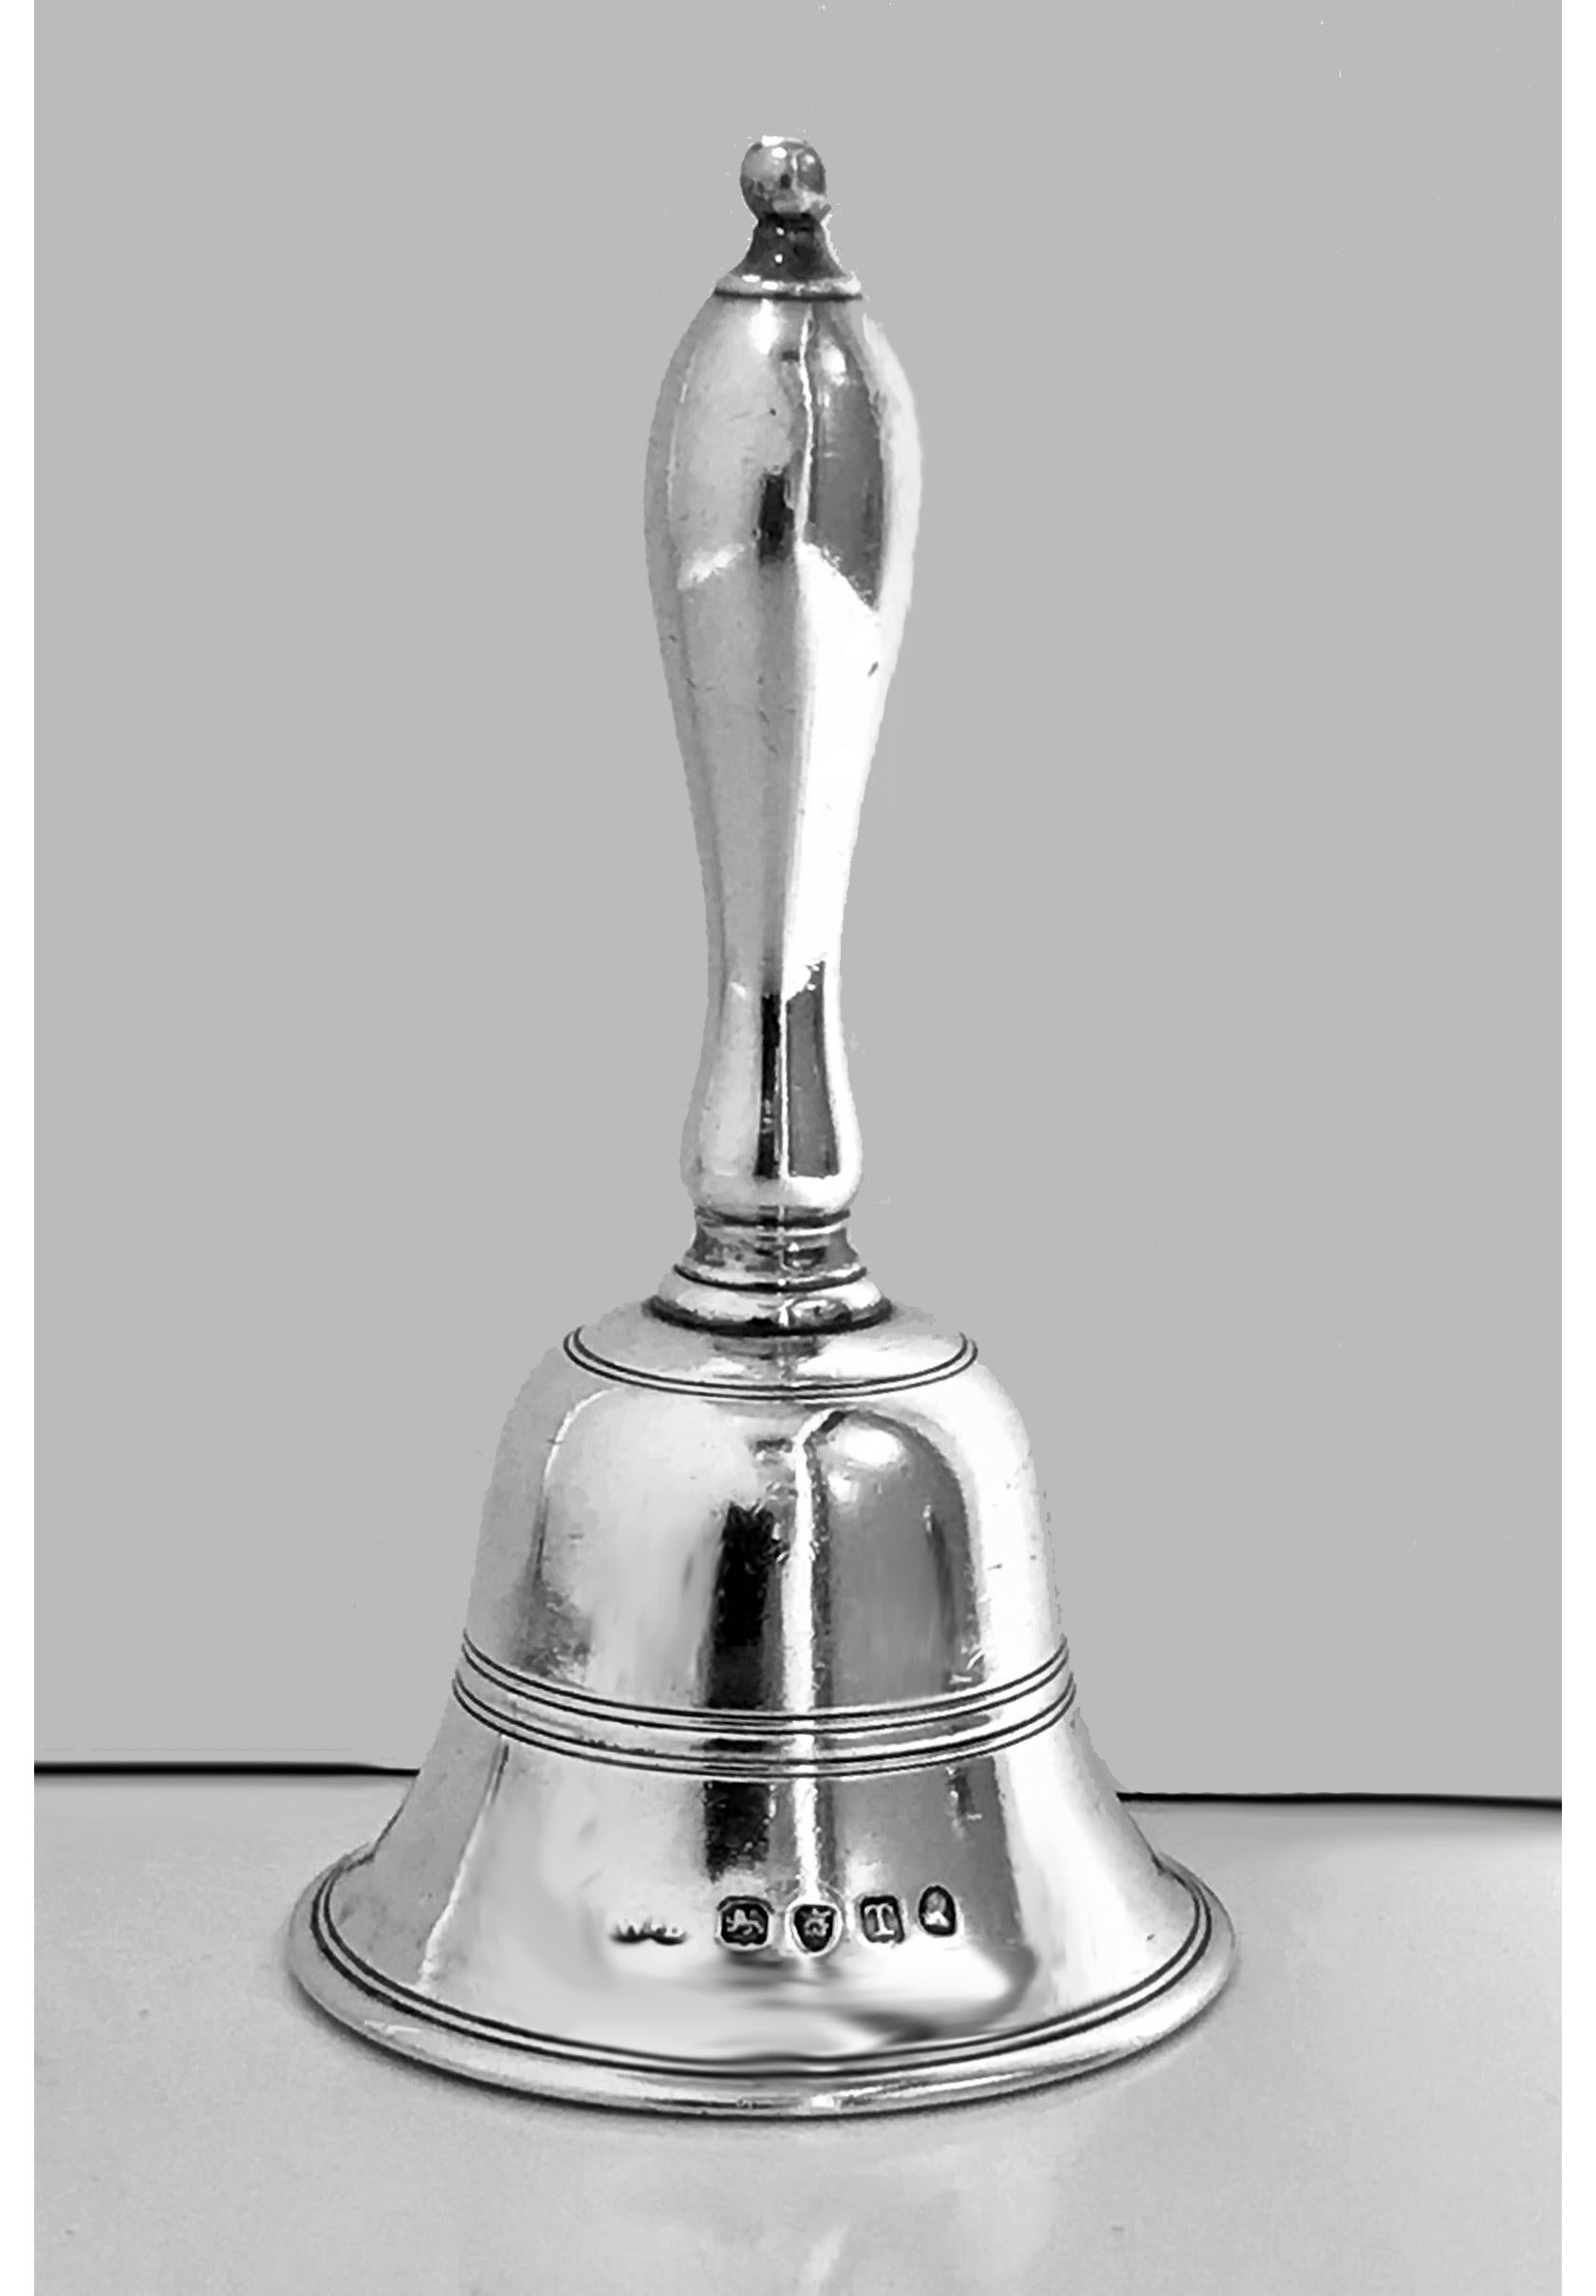 Georgian silver table dinner bell, London, 1814, William Bateman. The bell of plain round body with reeded borders, baluster handle, original silver clapper. Measures: Height 4.5 inches. Weight 3.72 oz. Full hallmarks and lion passant to clapper.